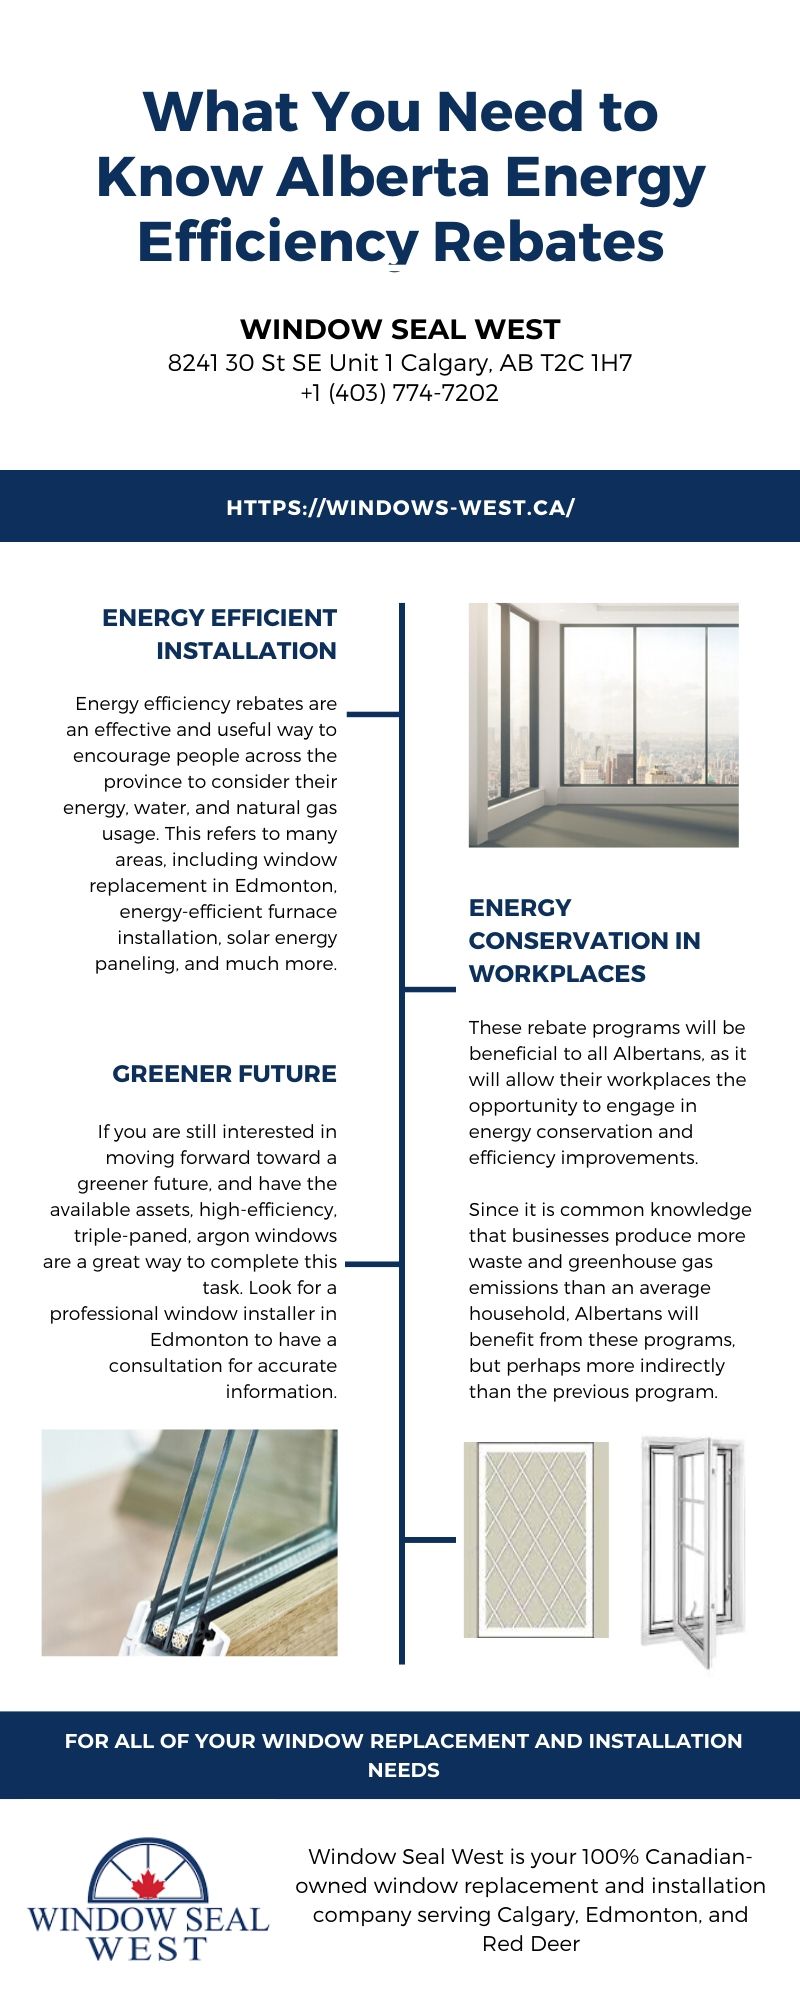 What You Need To Know Alberta Energy Efficiency Rebates Infographic Gifyu